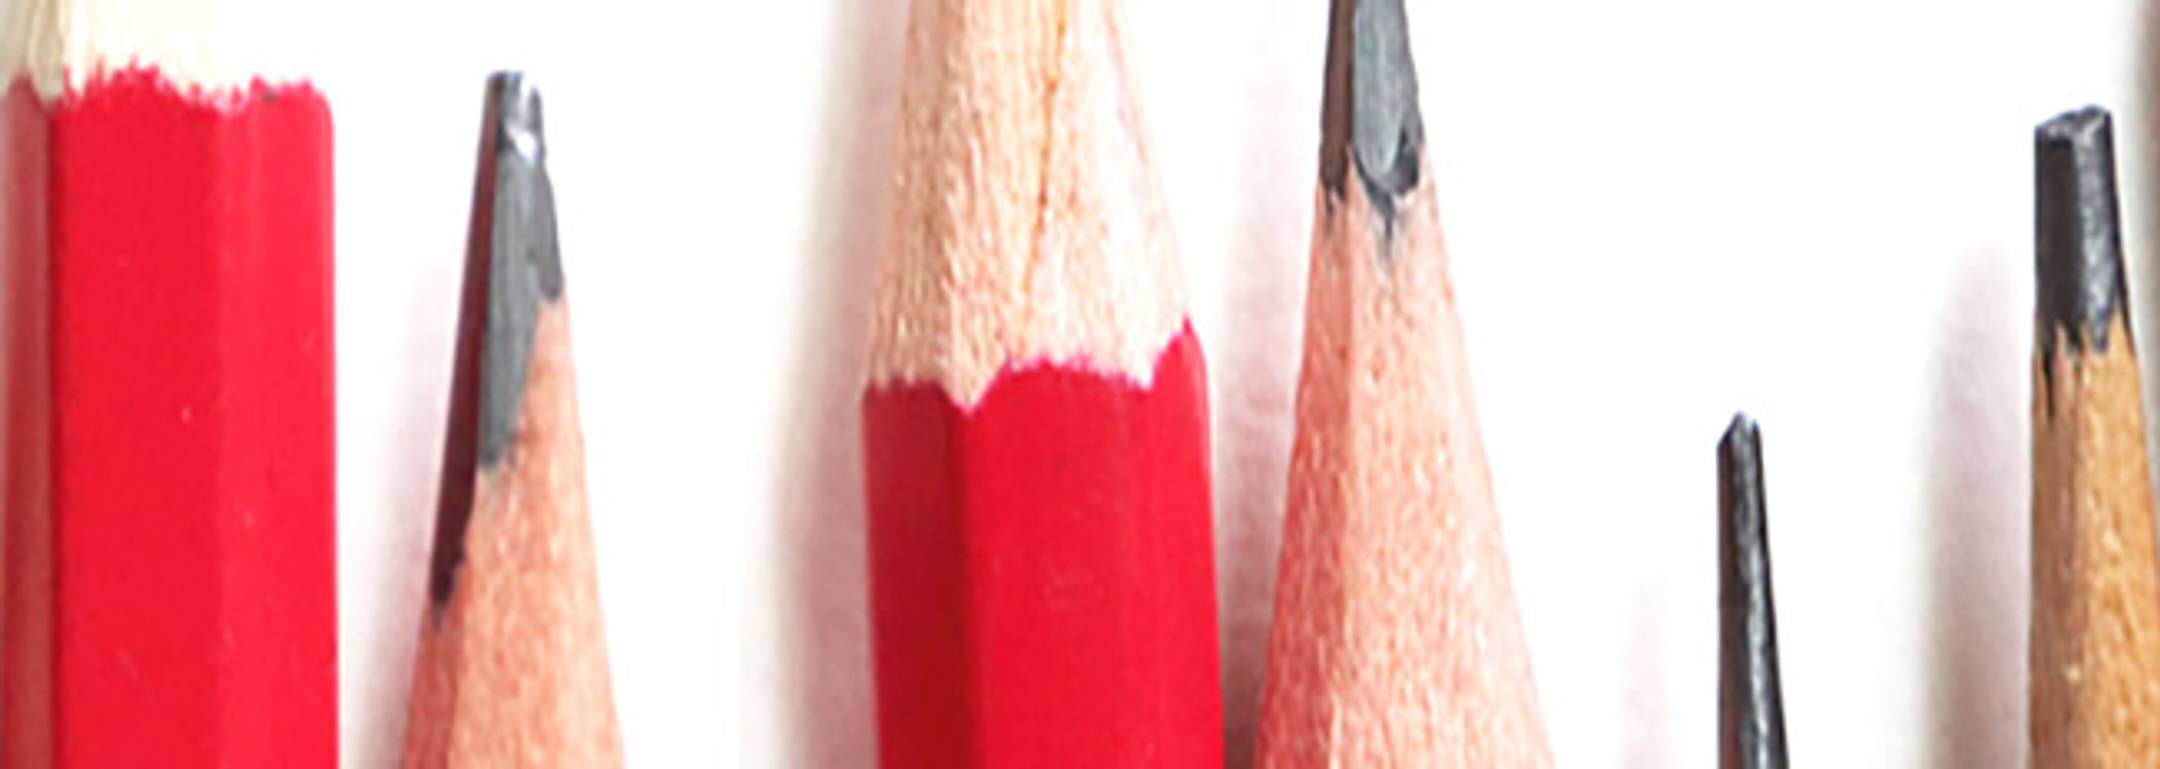 HB Pencils - Buy Quality HB Pencils for Drawing & Writing Online – Mont  Marte Global